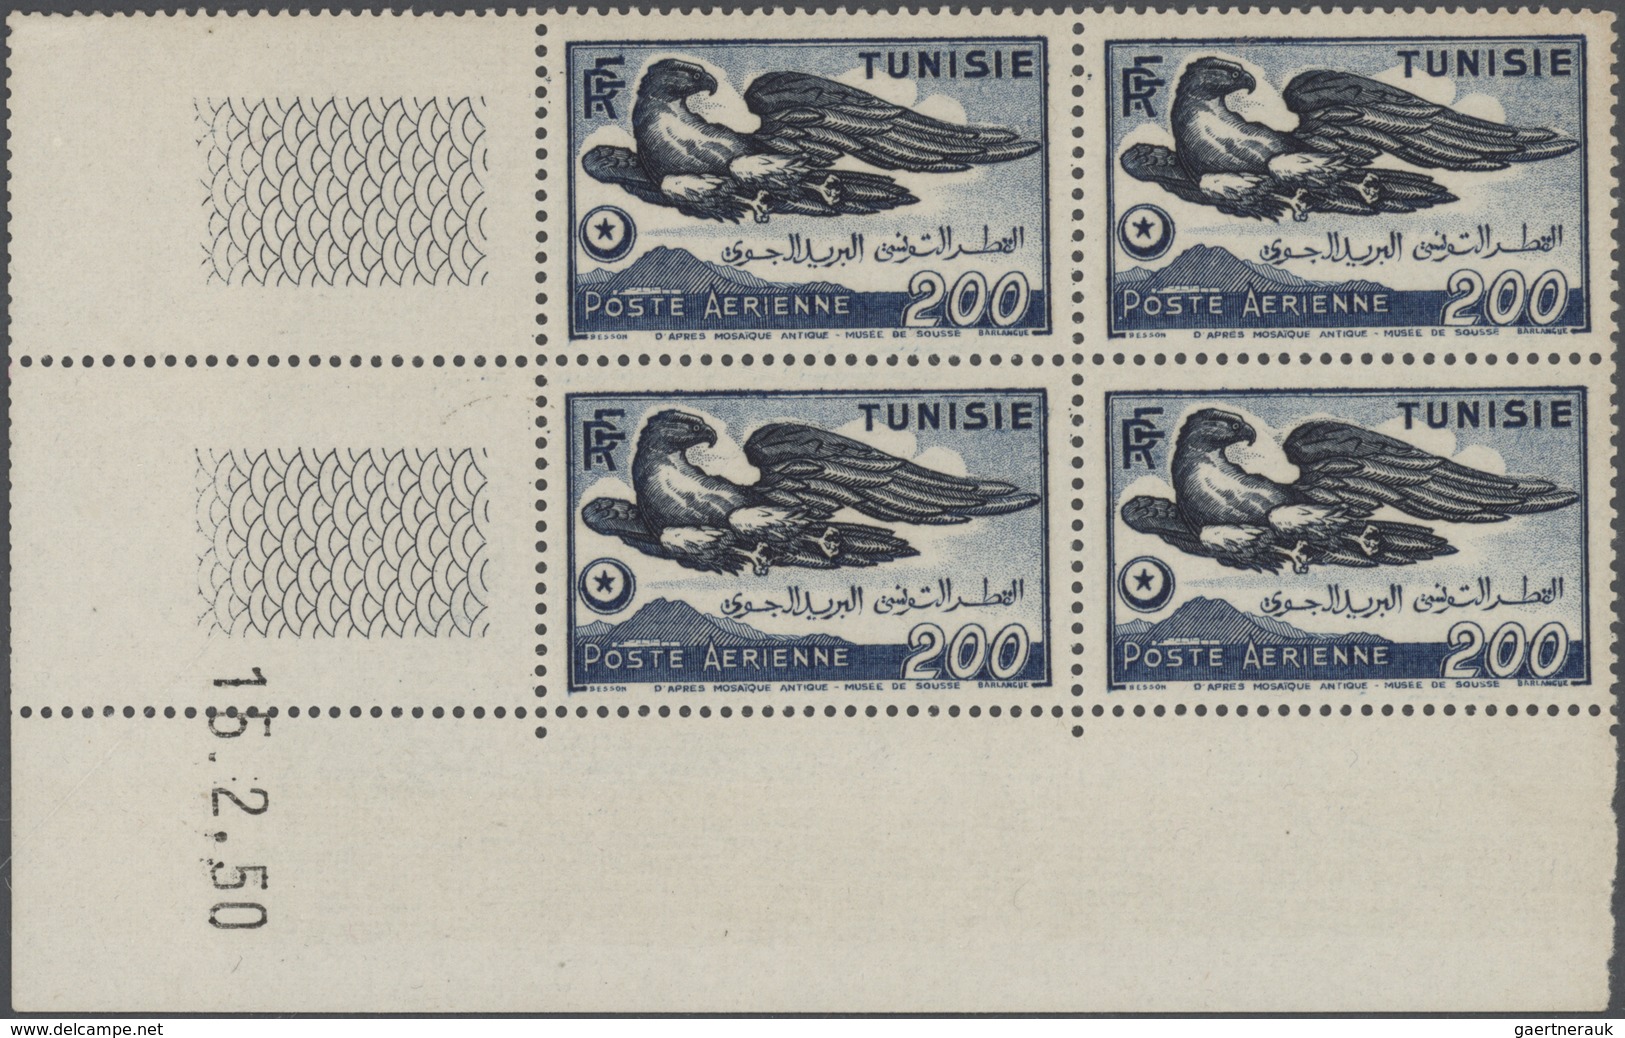 Tunesien: 1895/1975 (ca.), holding of mint material (mainly blocks of four with coins date) in a sto